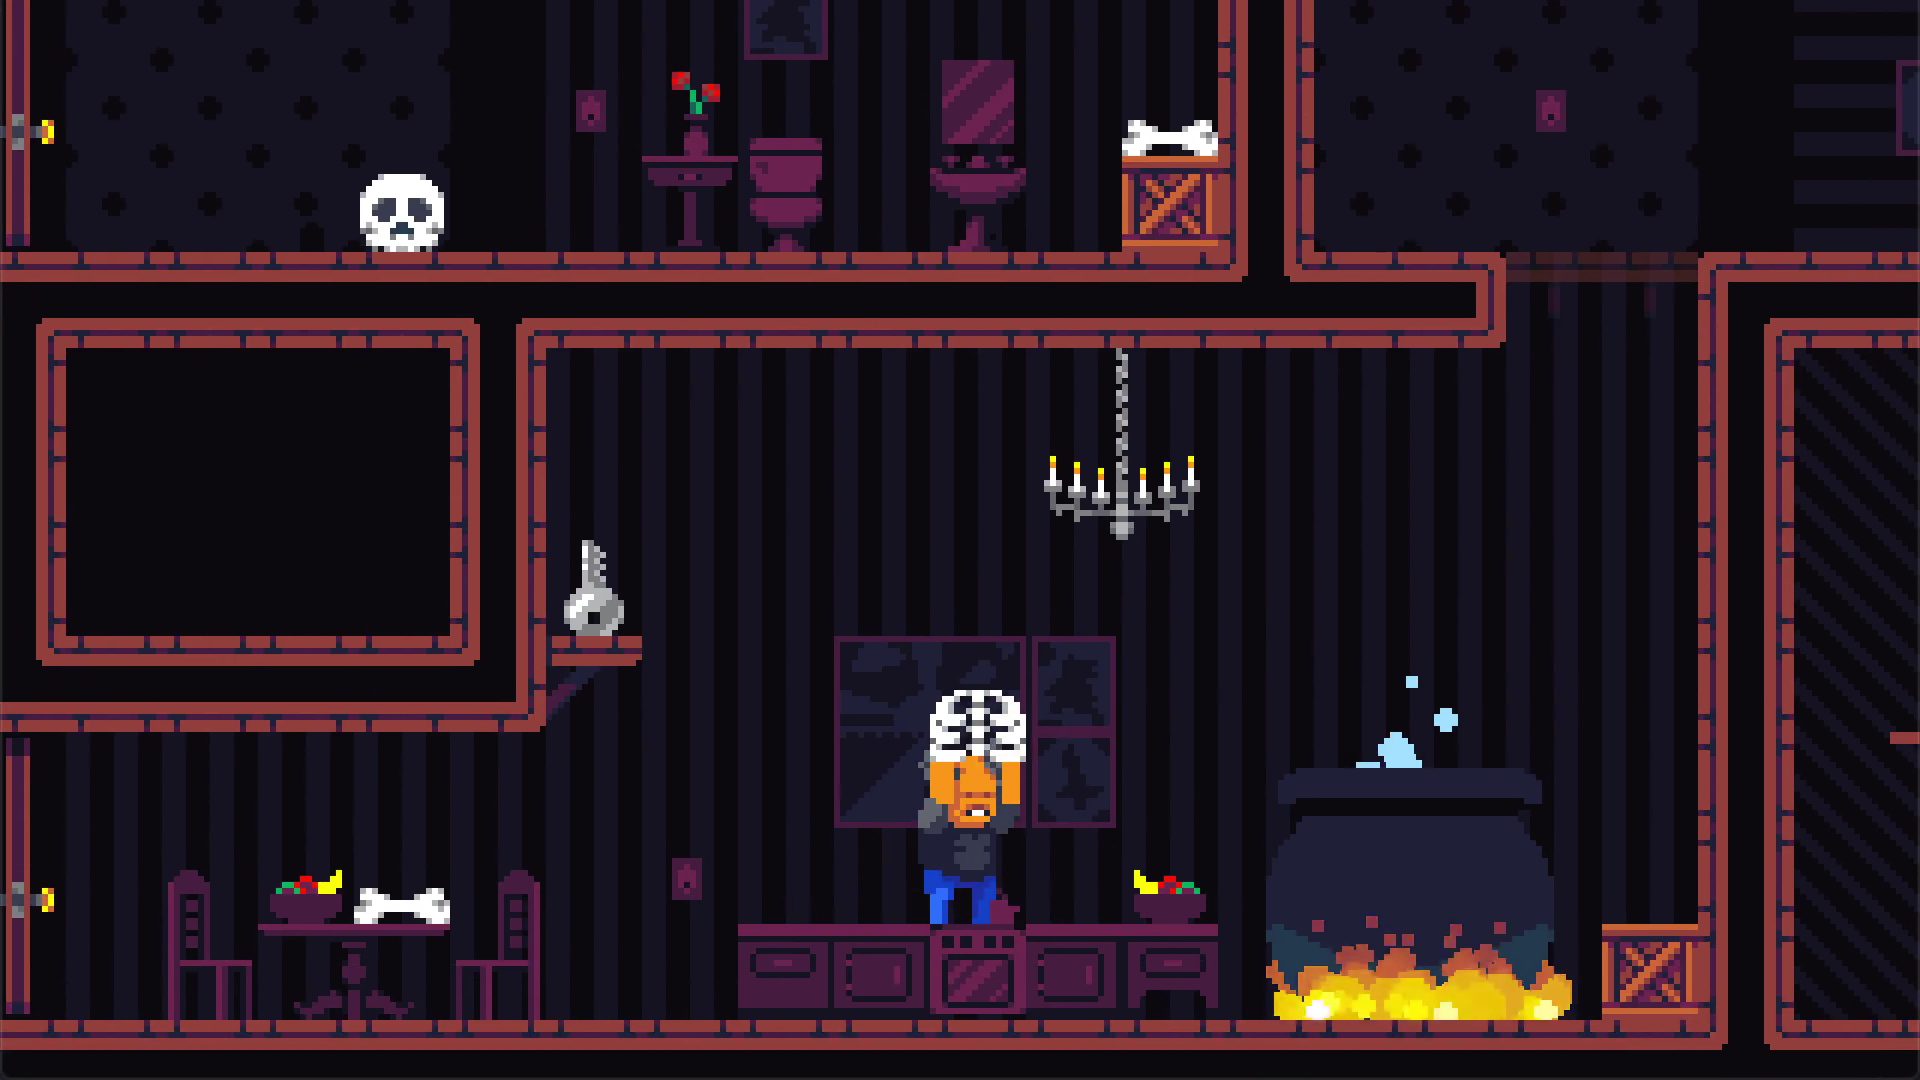 A screenshot of Midnight Manor with the main character holding a ribcage in a kitchen.